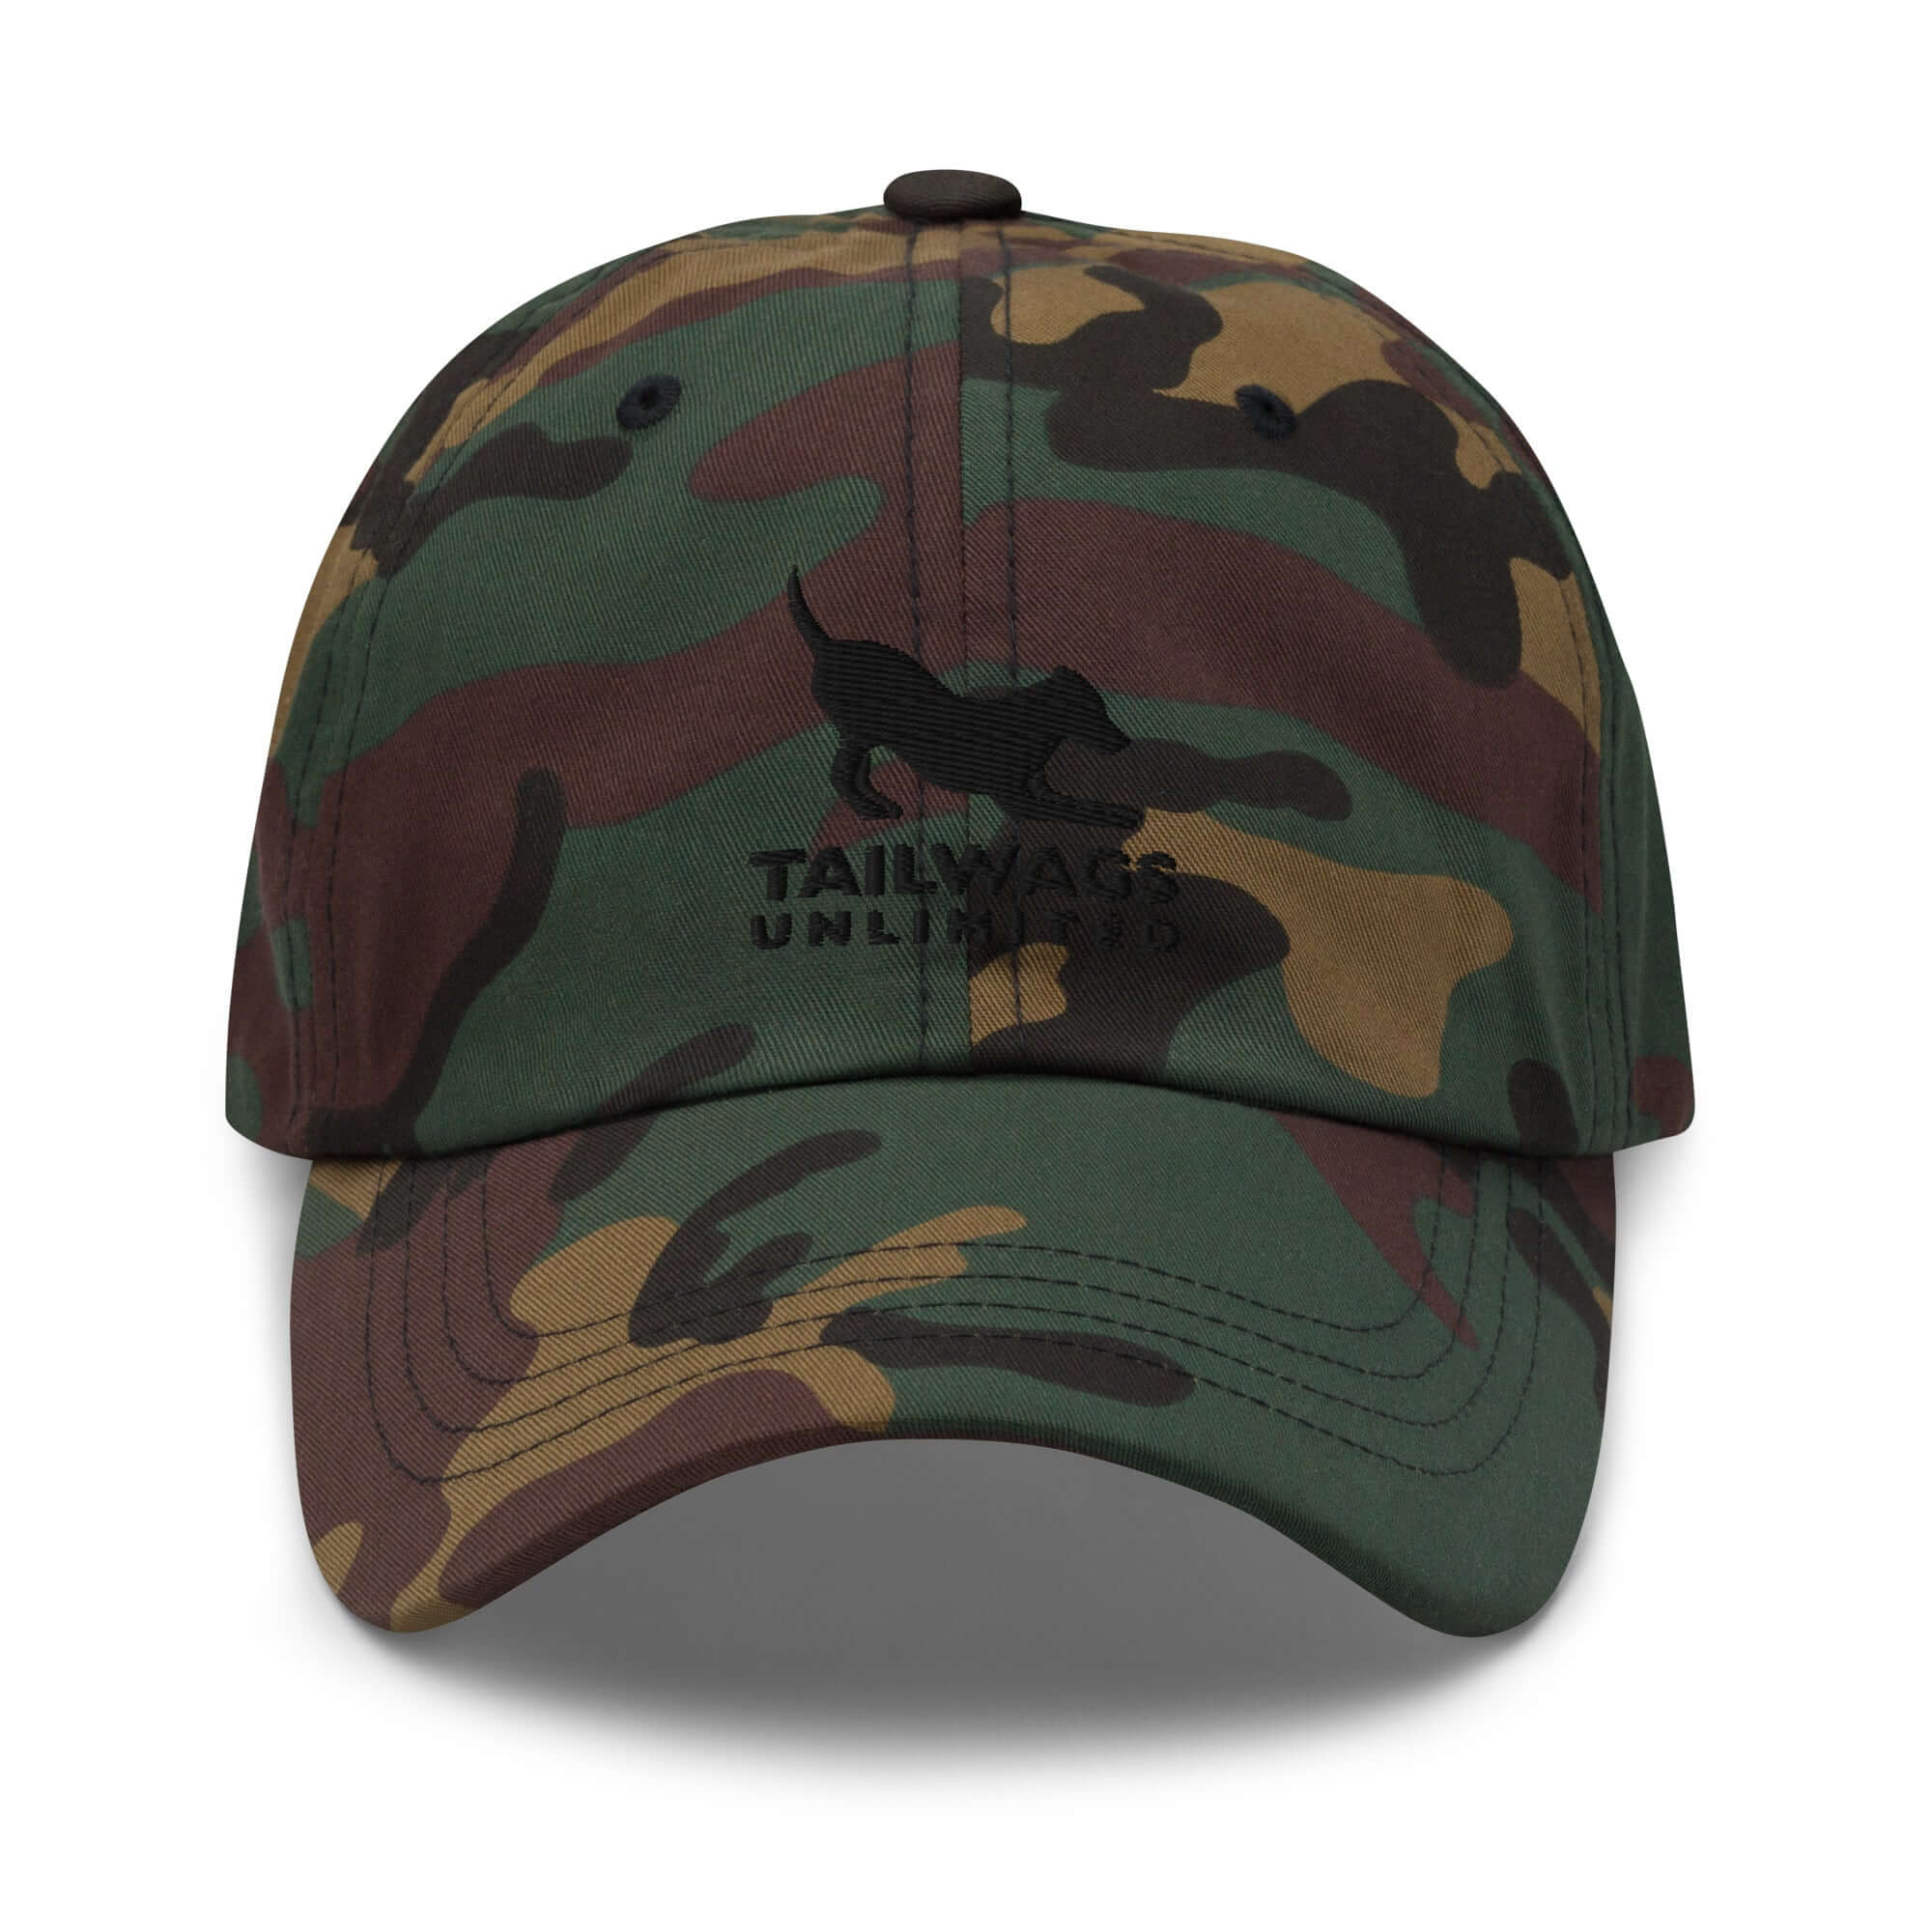 Black Logo Hat - TAILWAGS UNLIMITED